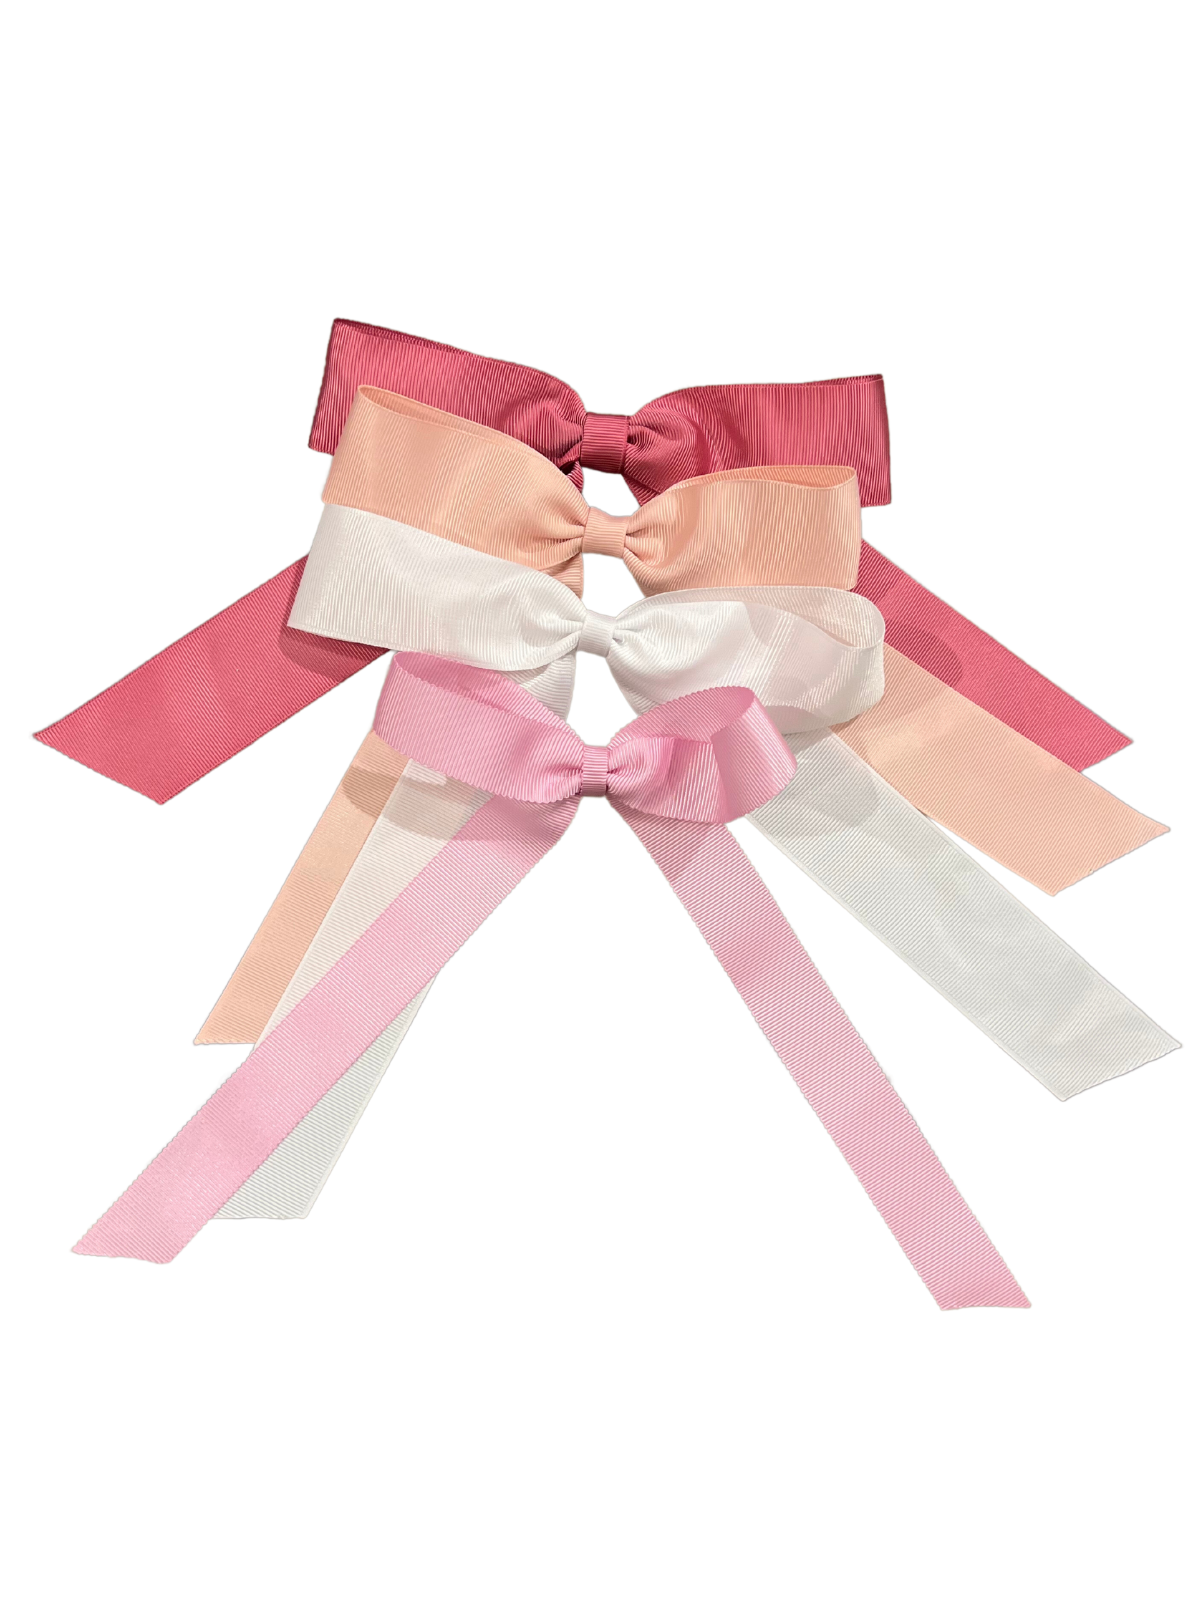 In Pinks Bows - set of four